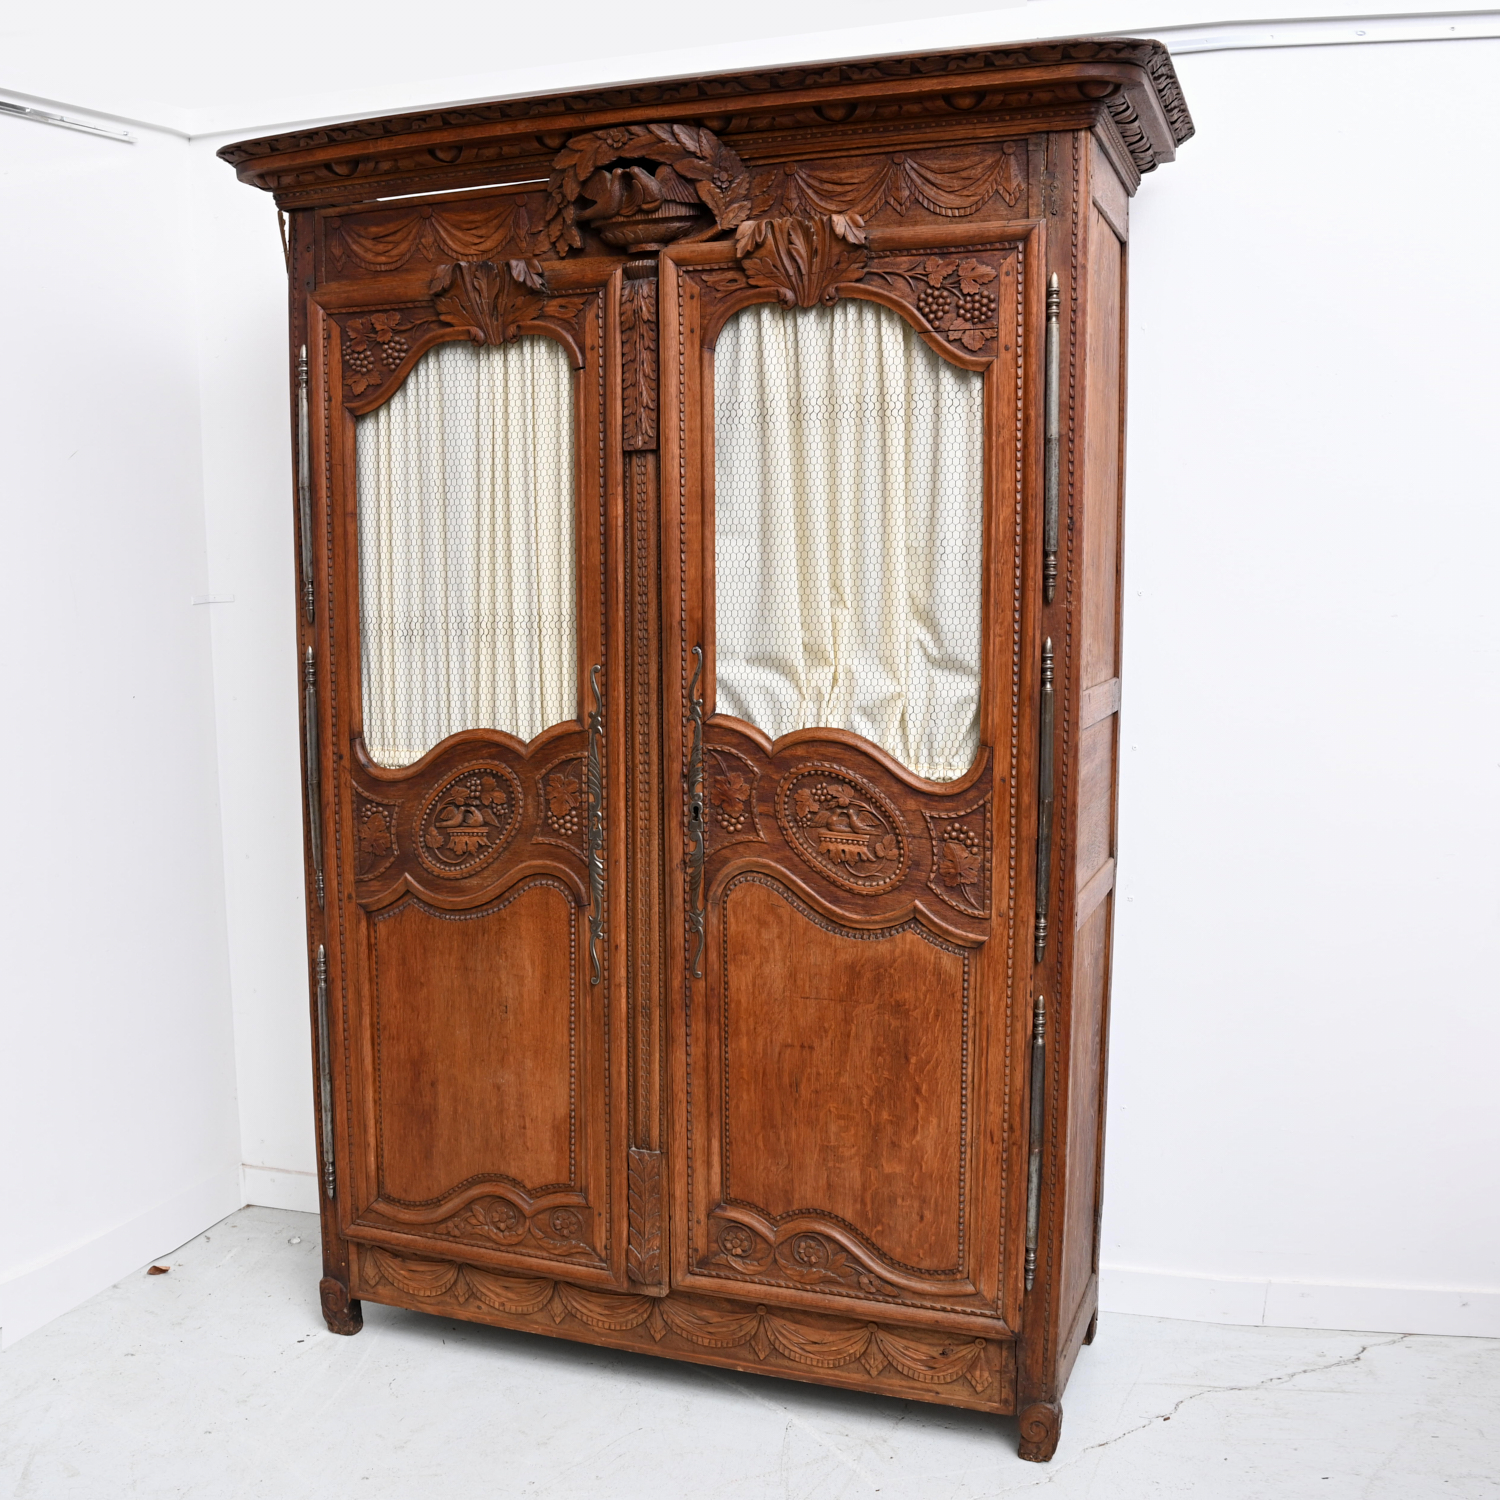 NICE FRENCH ANTIQUE CARVED WALNUT